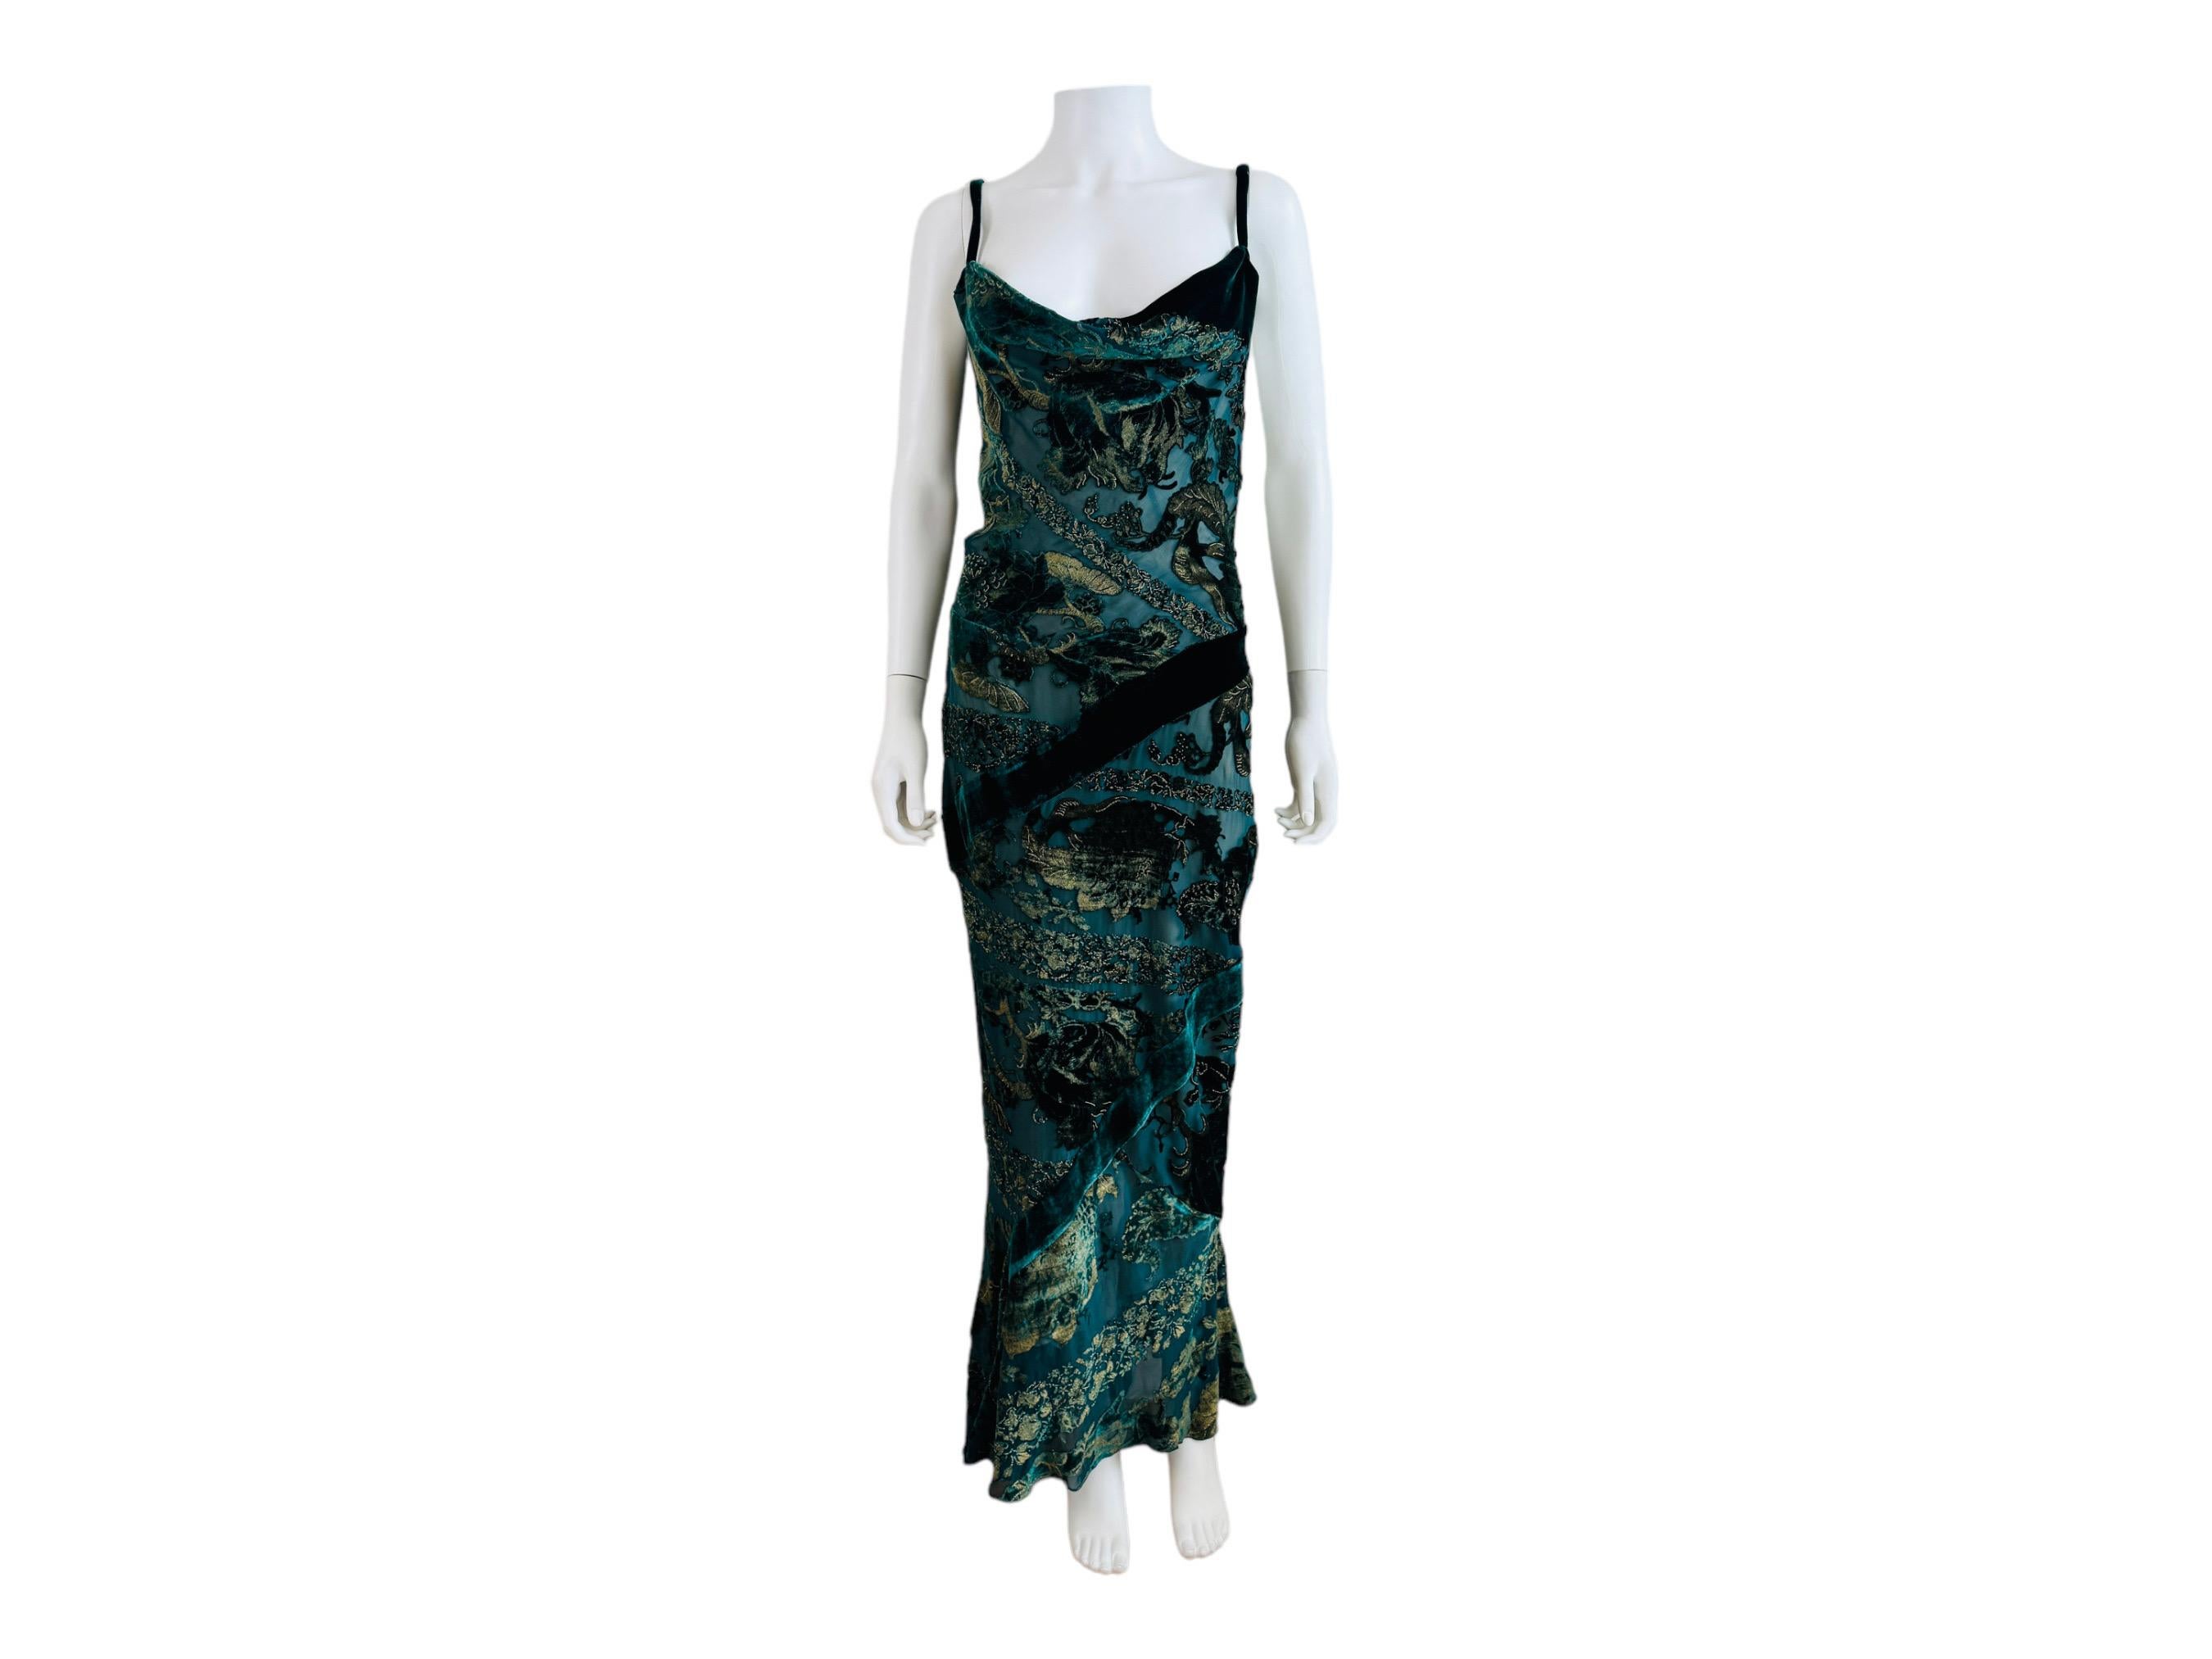 Early 2000s Roberto Cavalli Dress
Silk + viscose green + gold velvet fabric
Floral burnout print throughout
Draped neckline
Fitted bias style
Thin shoulder straps
Open very low cut back with draped details
Hidden zipper up the side with gold logo